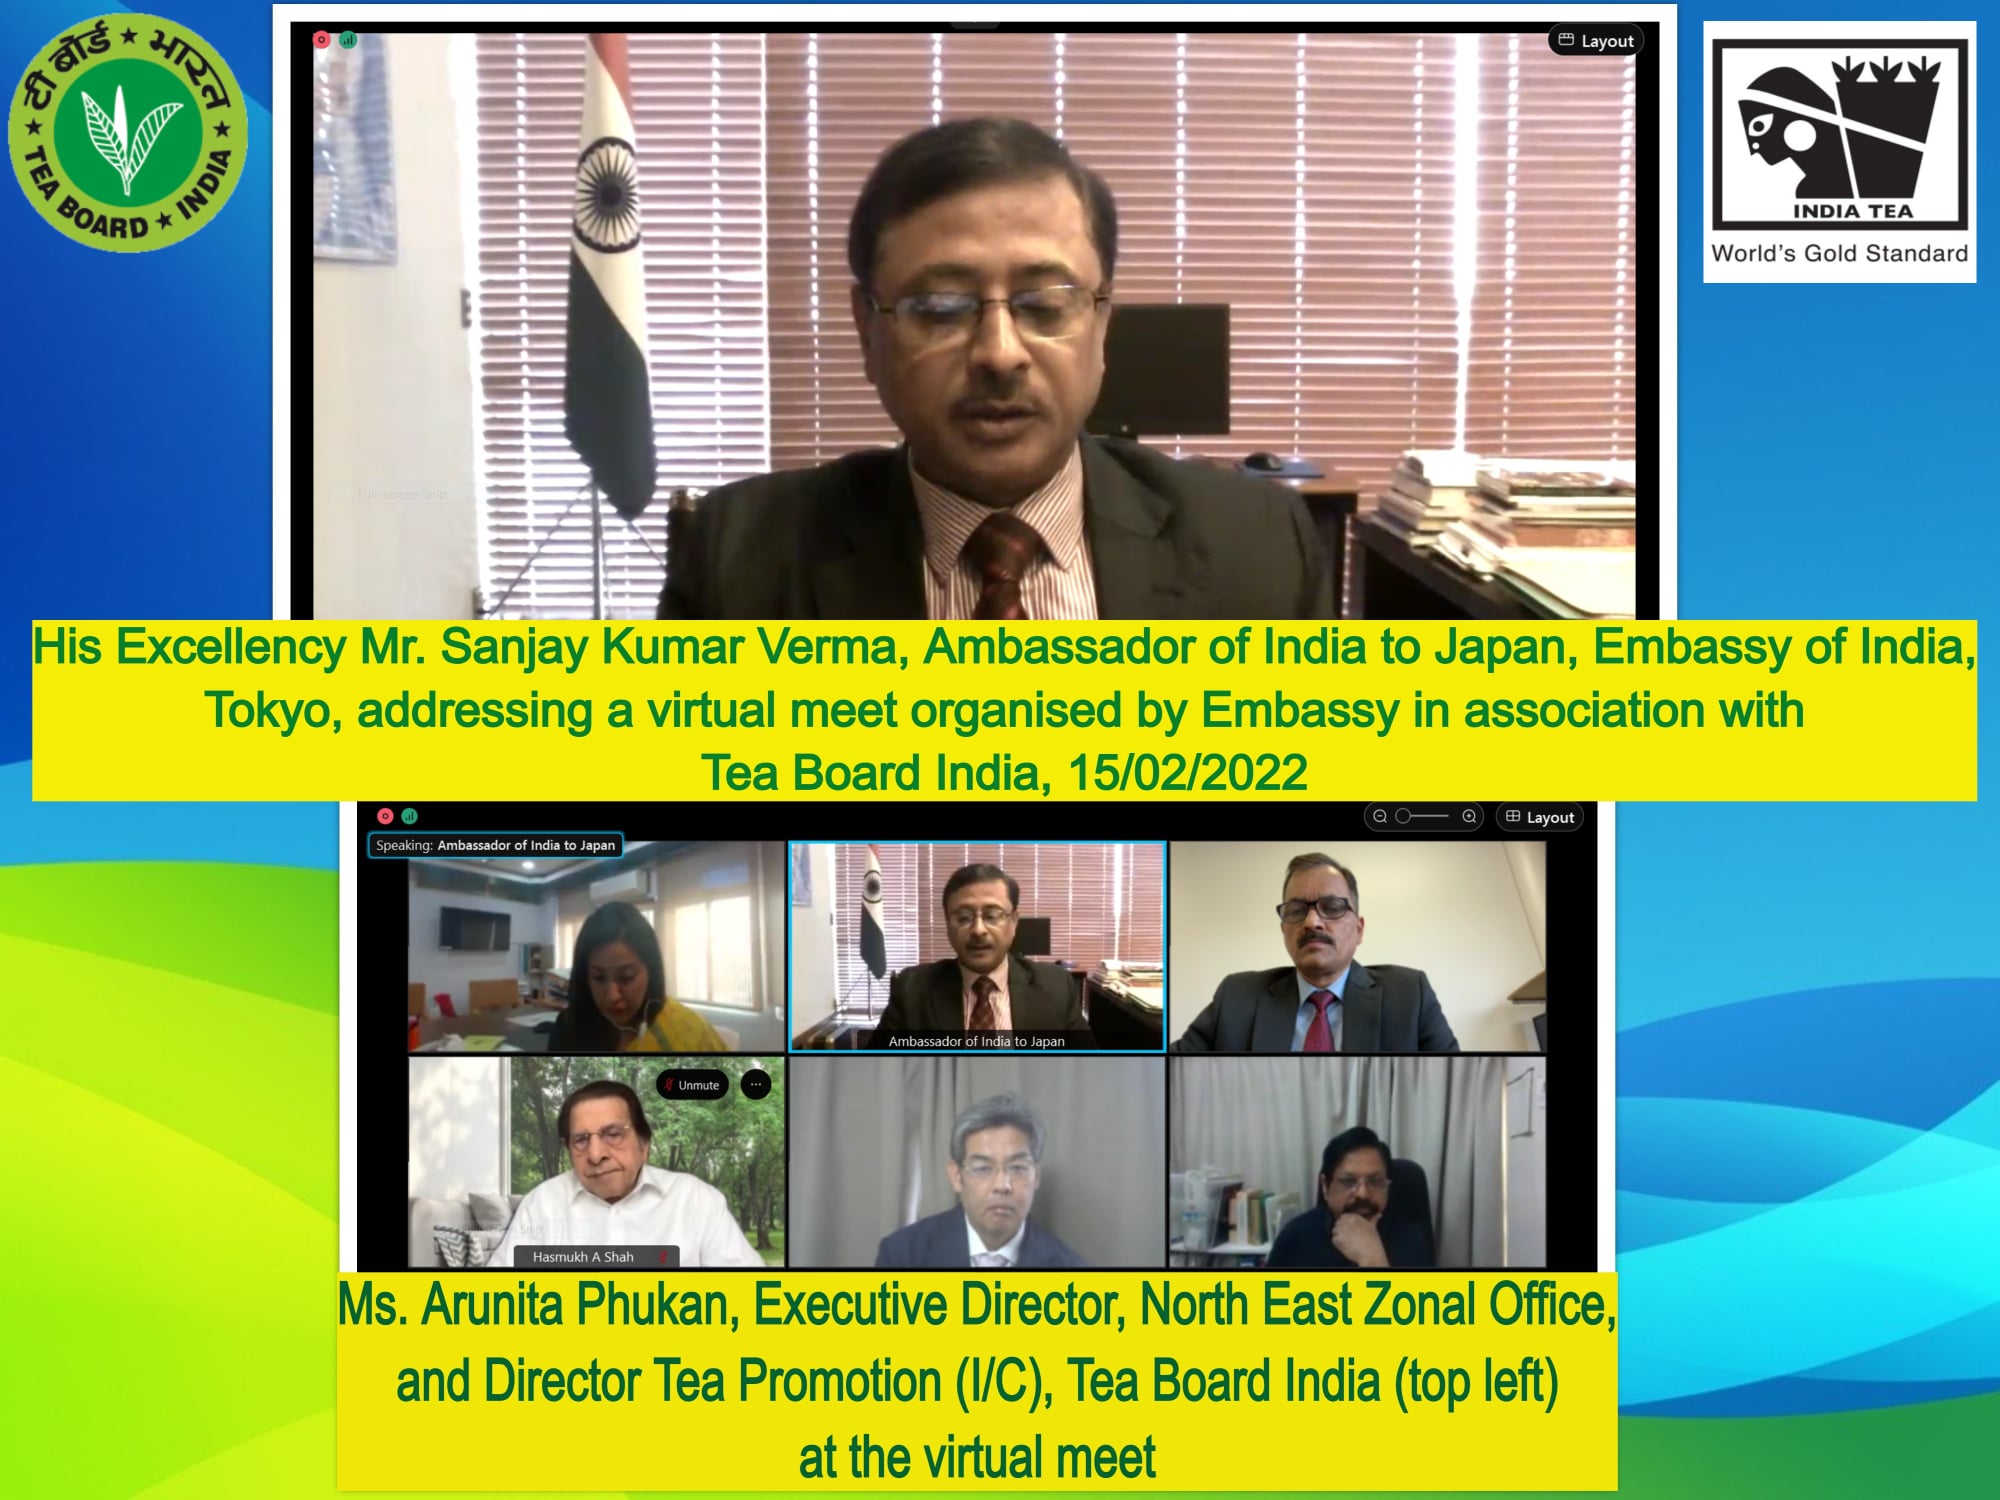 Virtual meet organised by Embassy of India, Tokyo, Japan, in association with Tea Board India, 15-02-2022